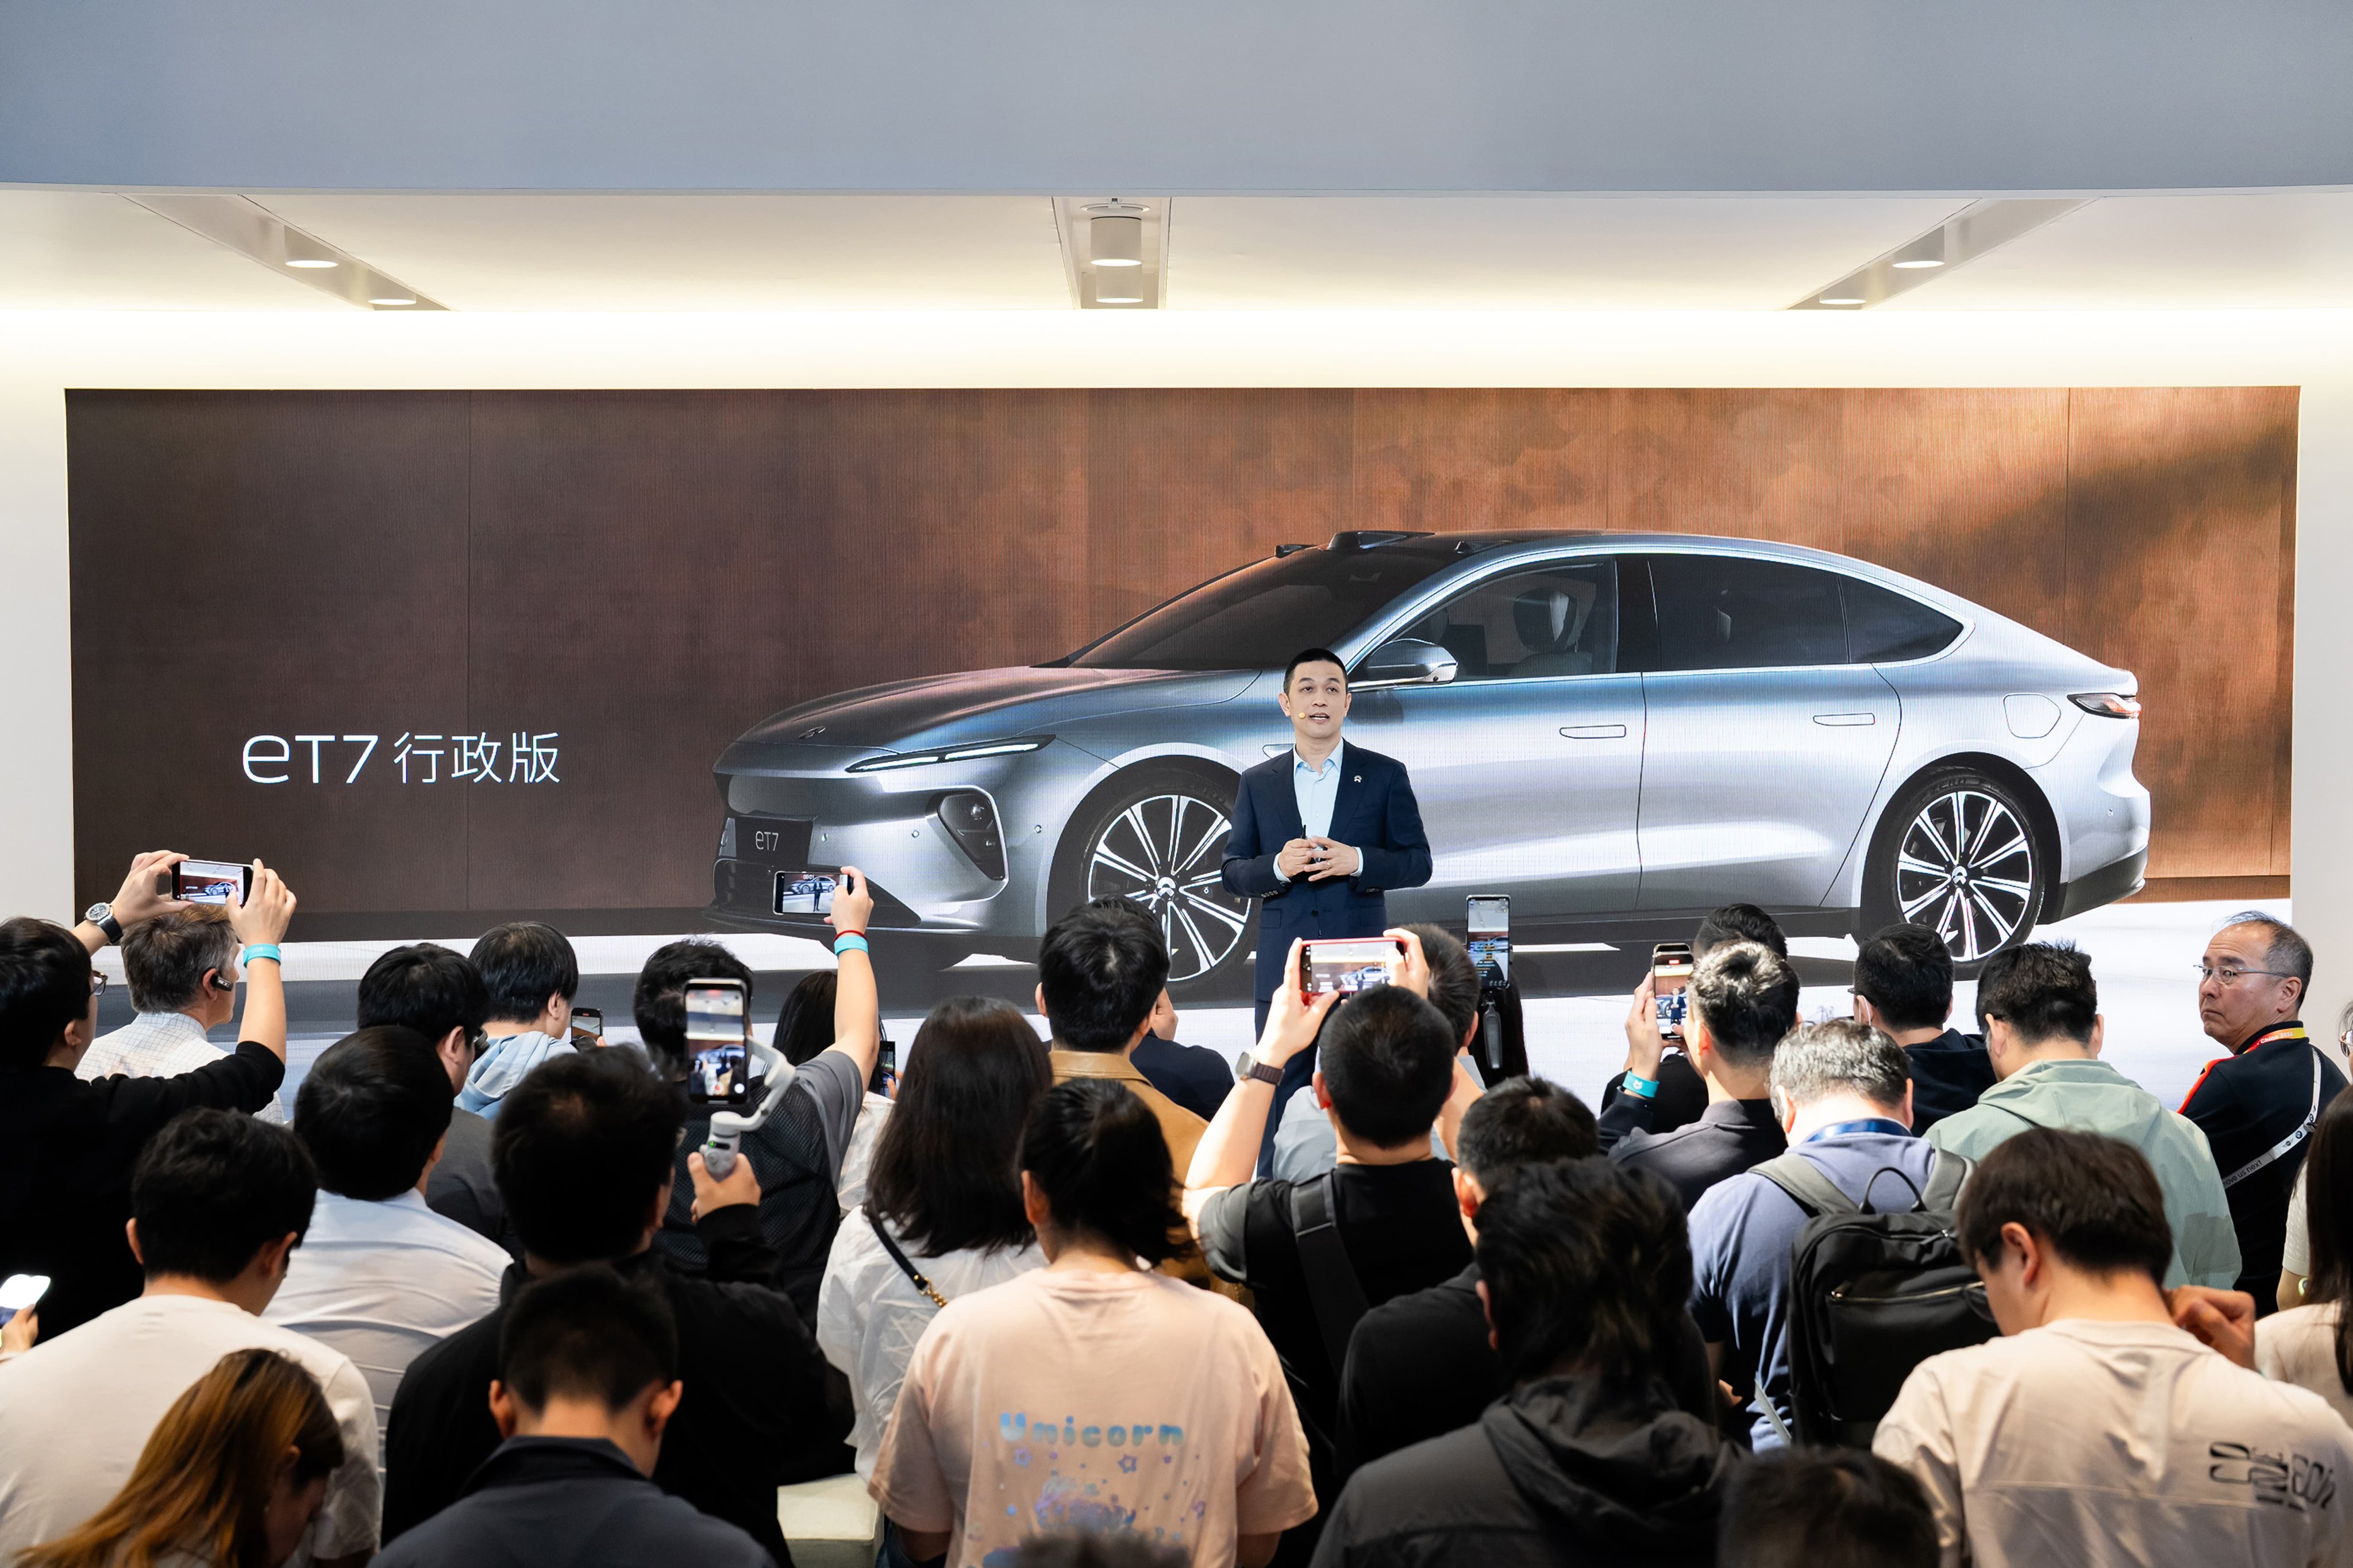 Nio founder and CEO William Li Bin at the launch of the EV maker’s refreshed ET 7 model in Beijing on Thursday. Photo: Handout